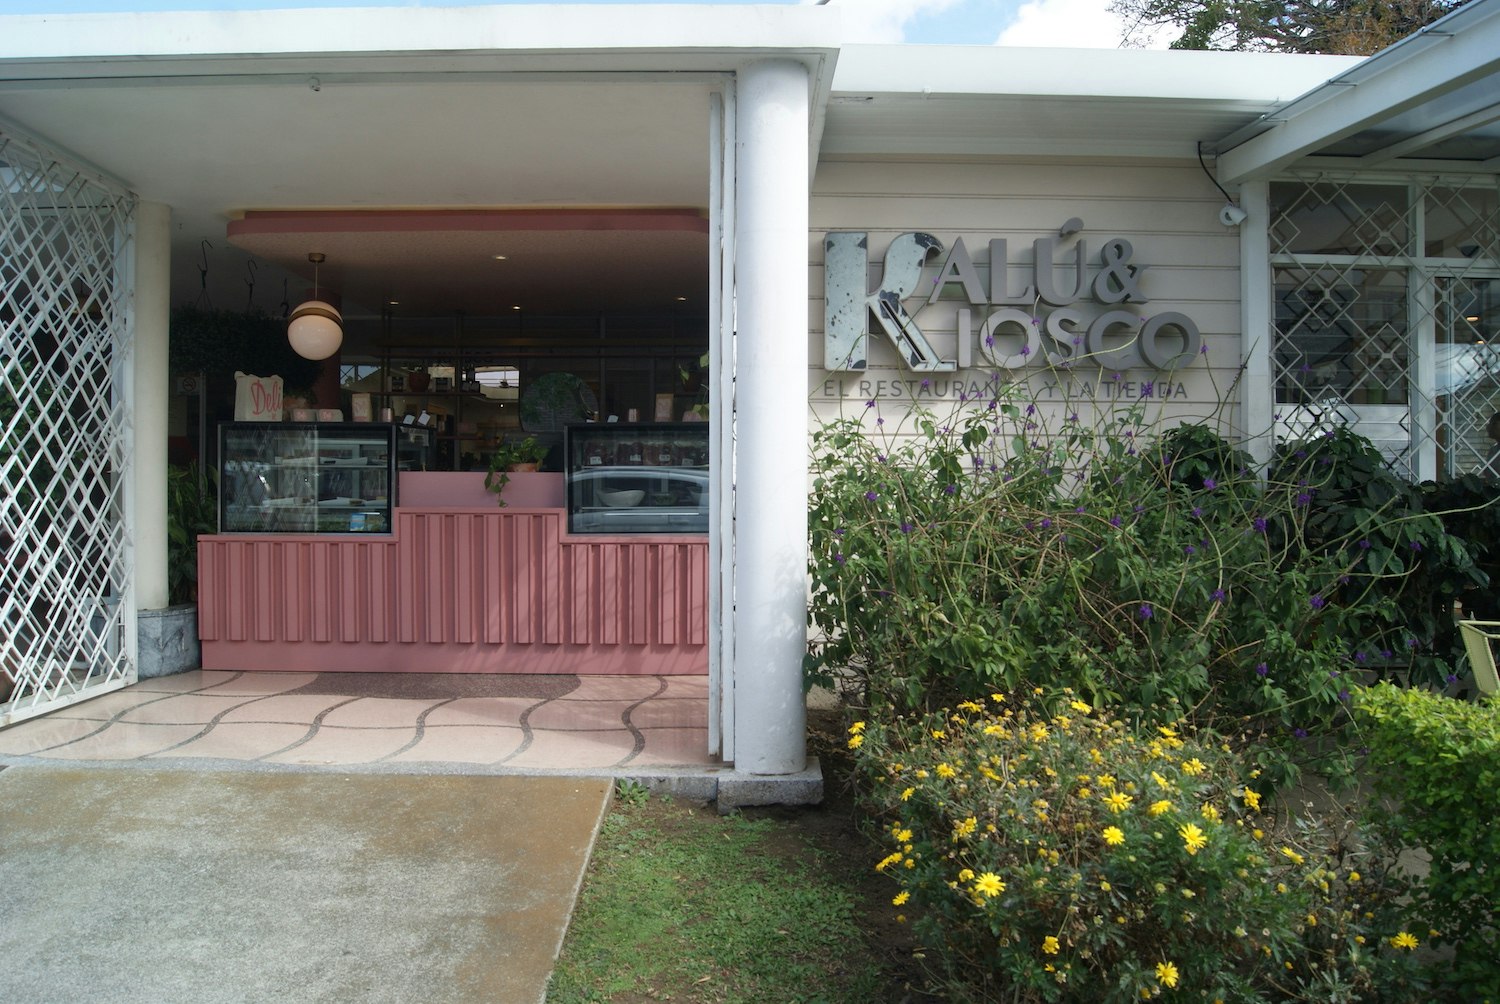 Exterior shot of Kalú restaurant. Just beyond the door frame is a bright pink counter with glass containers on opposite sides.